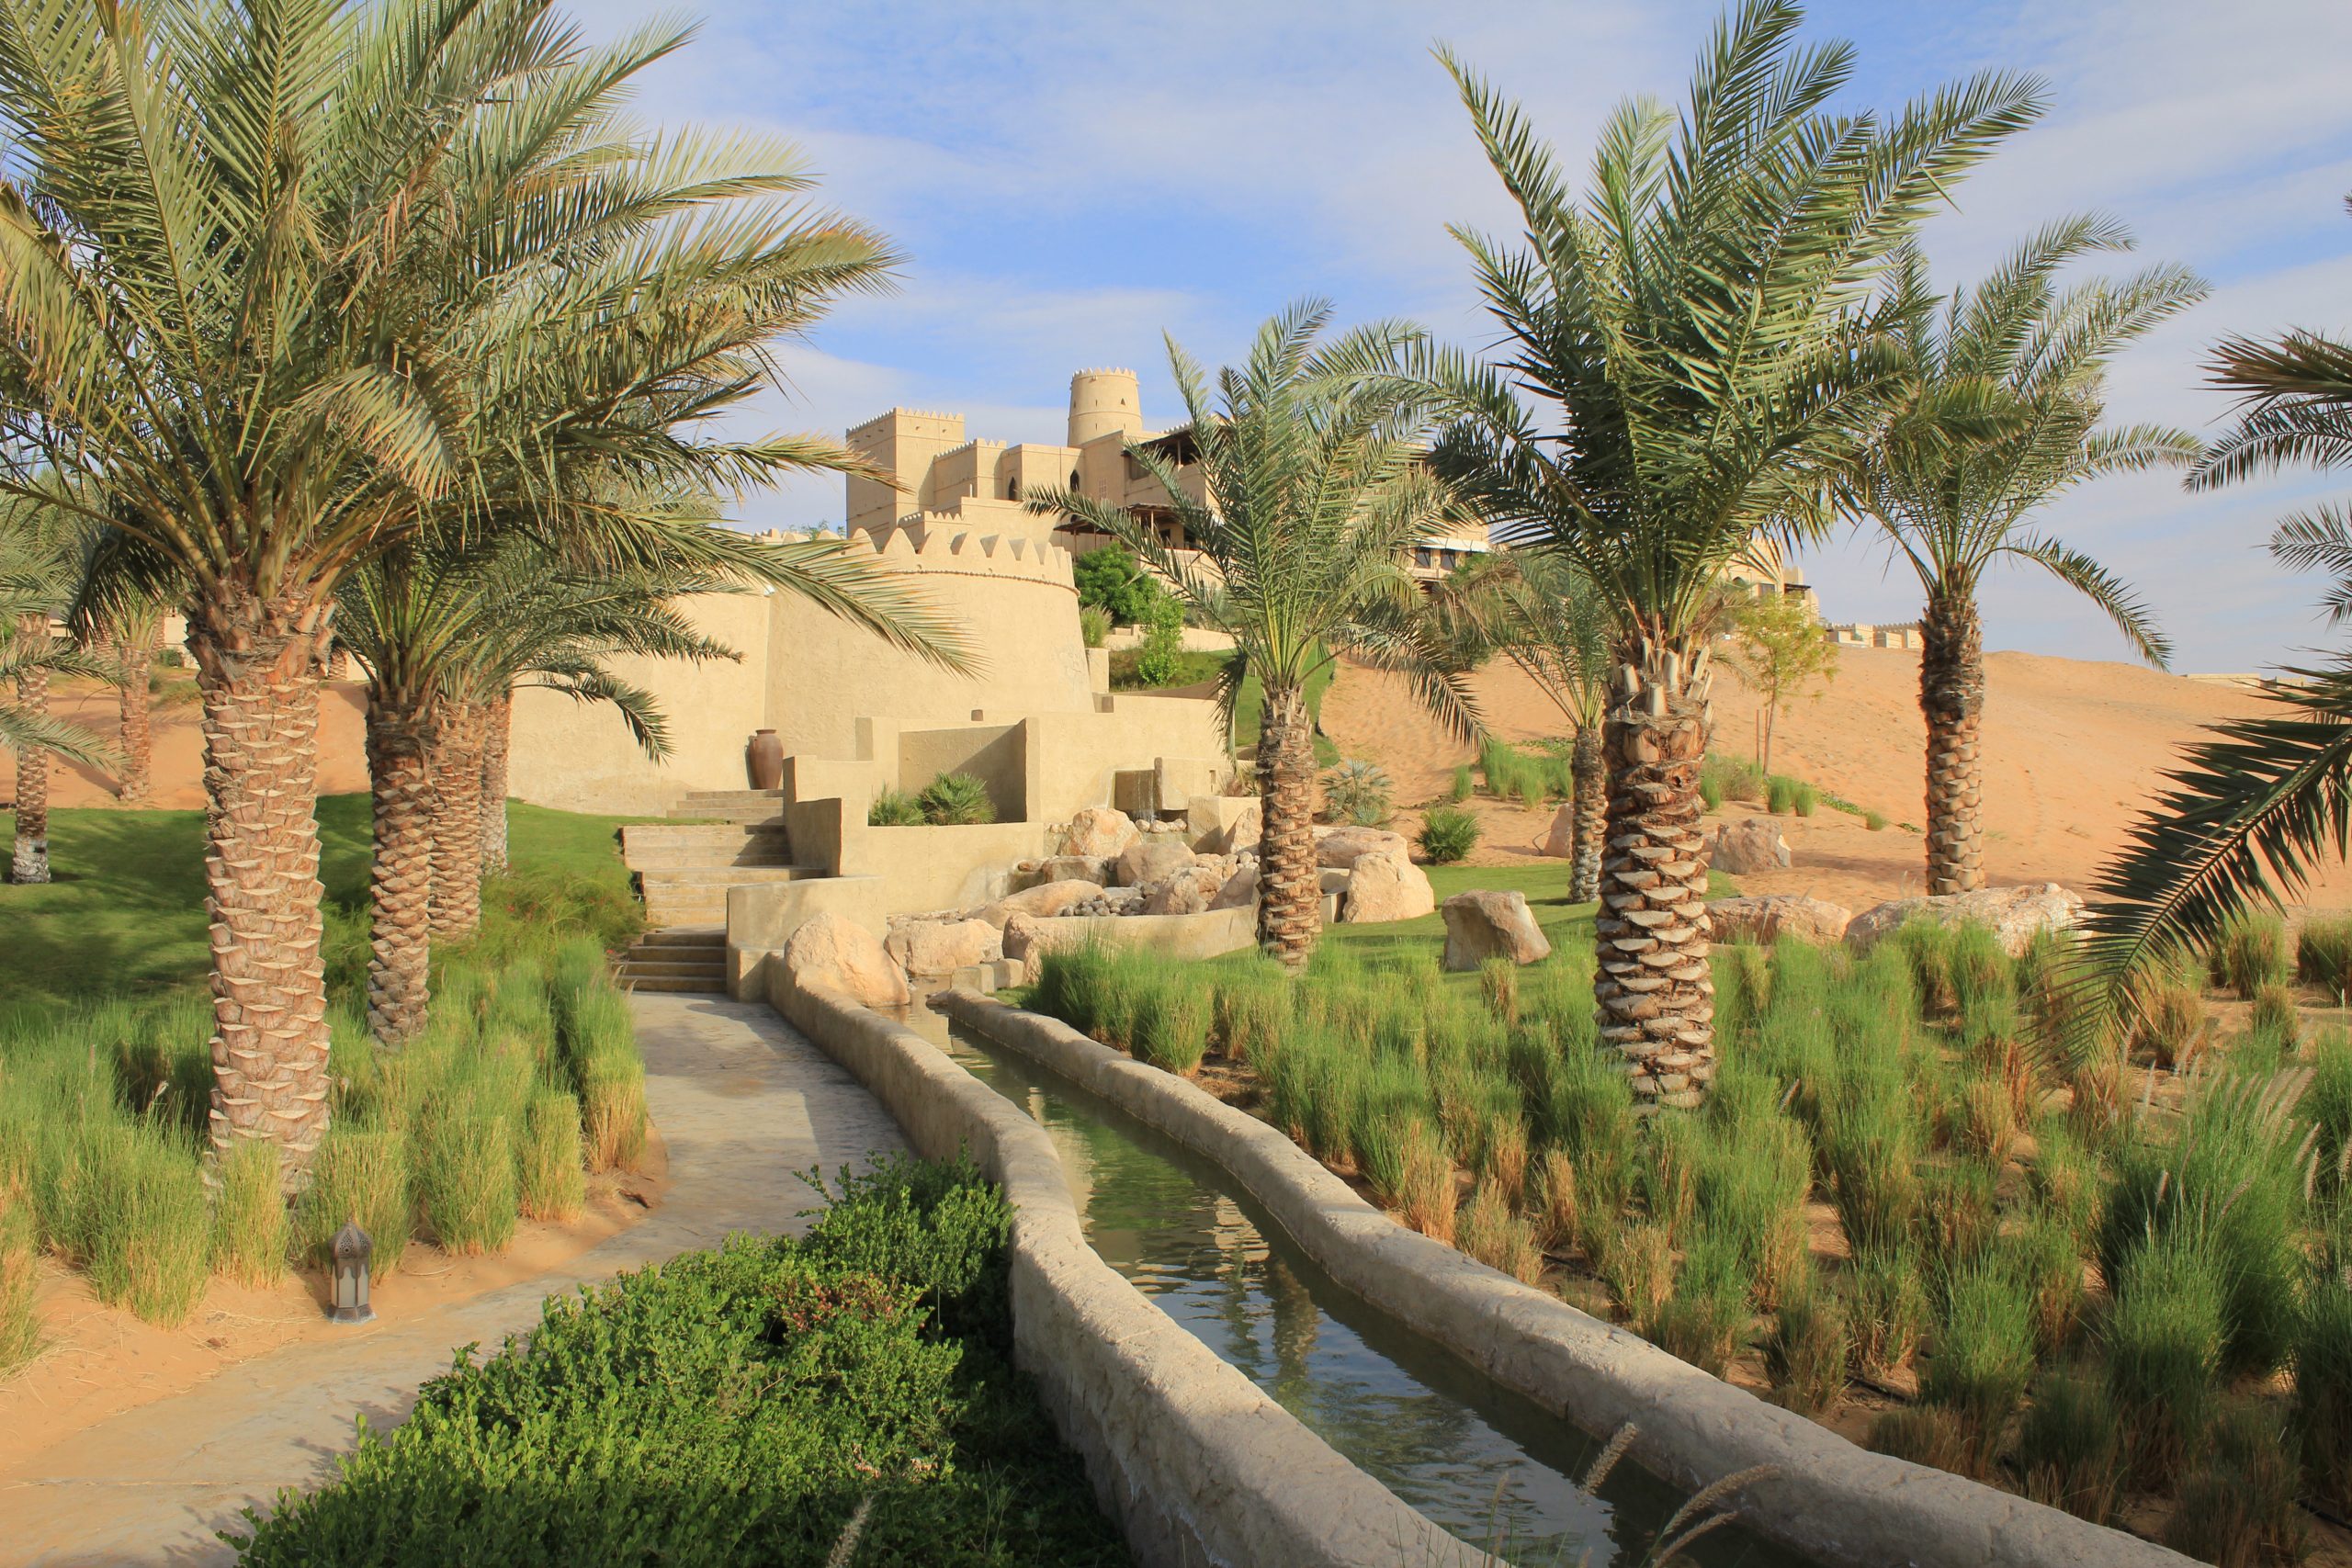 What lives in the Liwa Oasis?